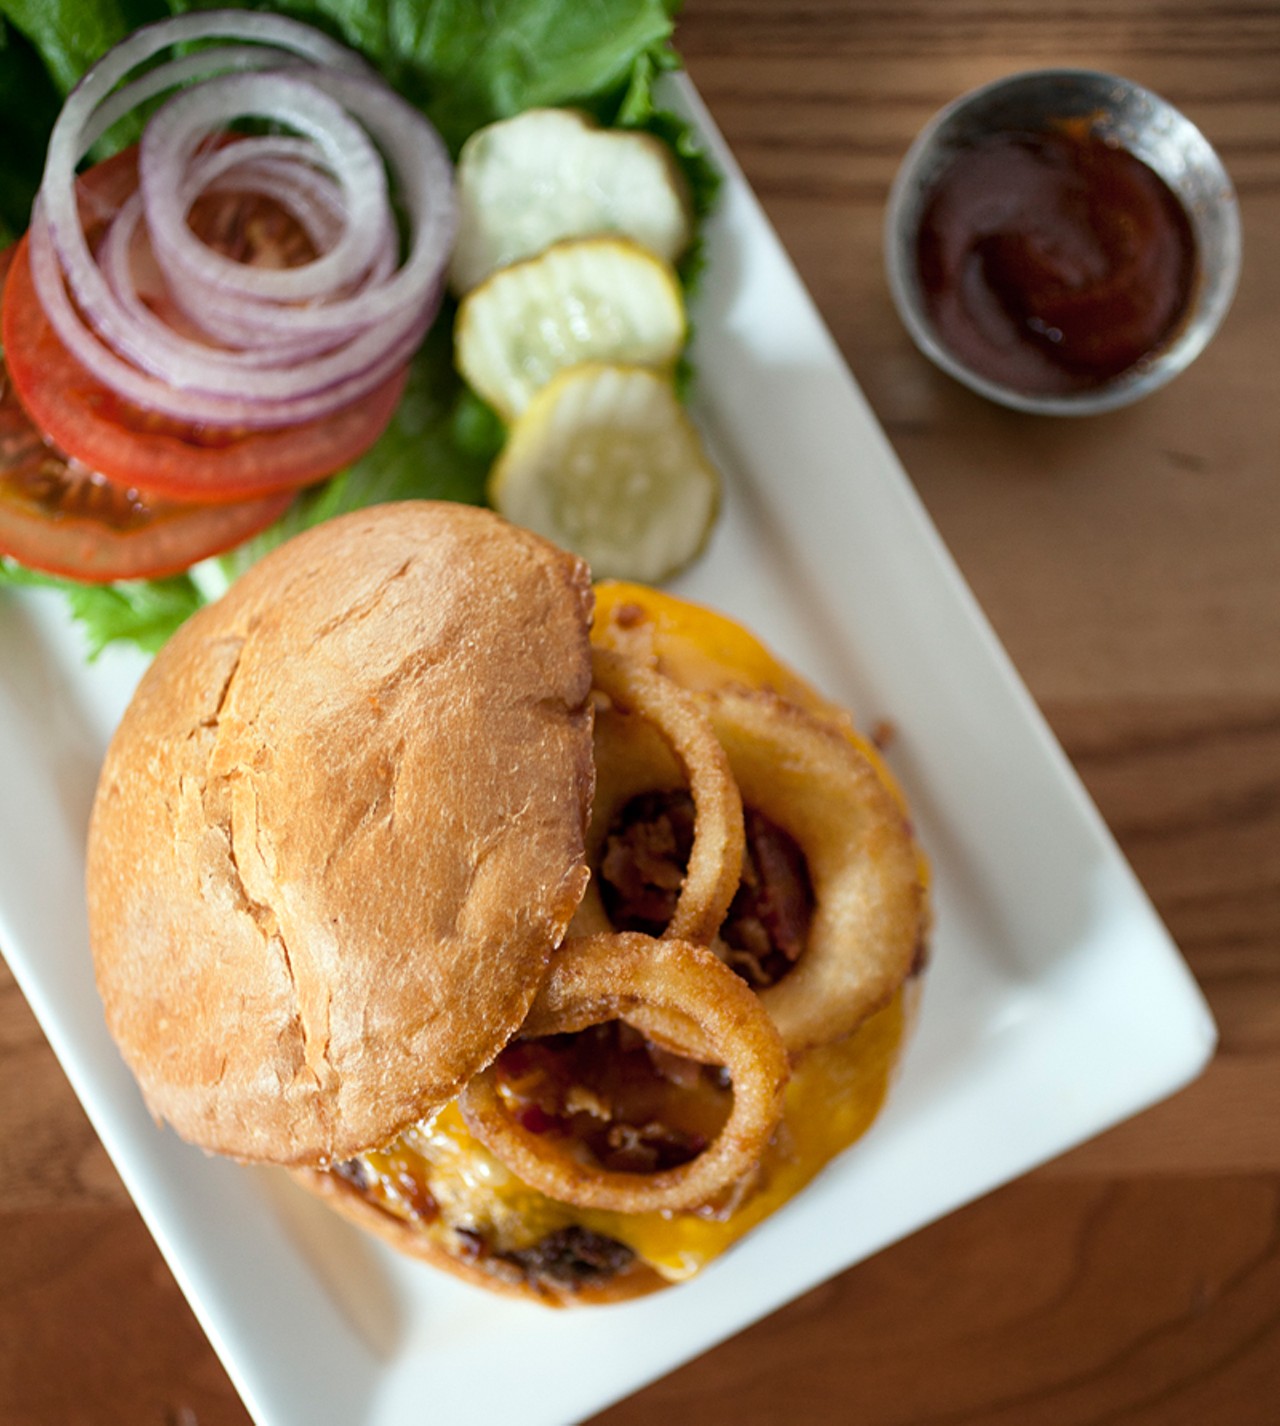 The "Gateway Burger" is served with smoked bacon, crispy onion rings, cheddar cheese and barbecue sauce.